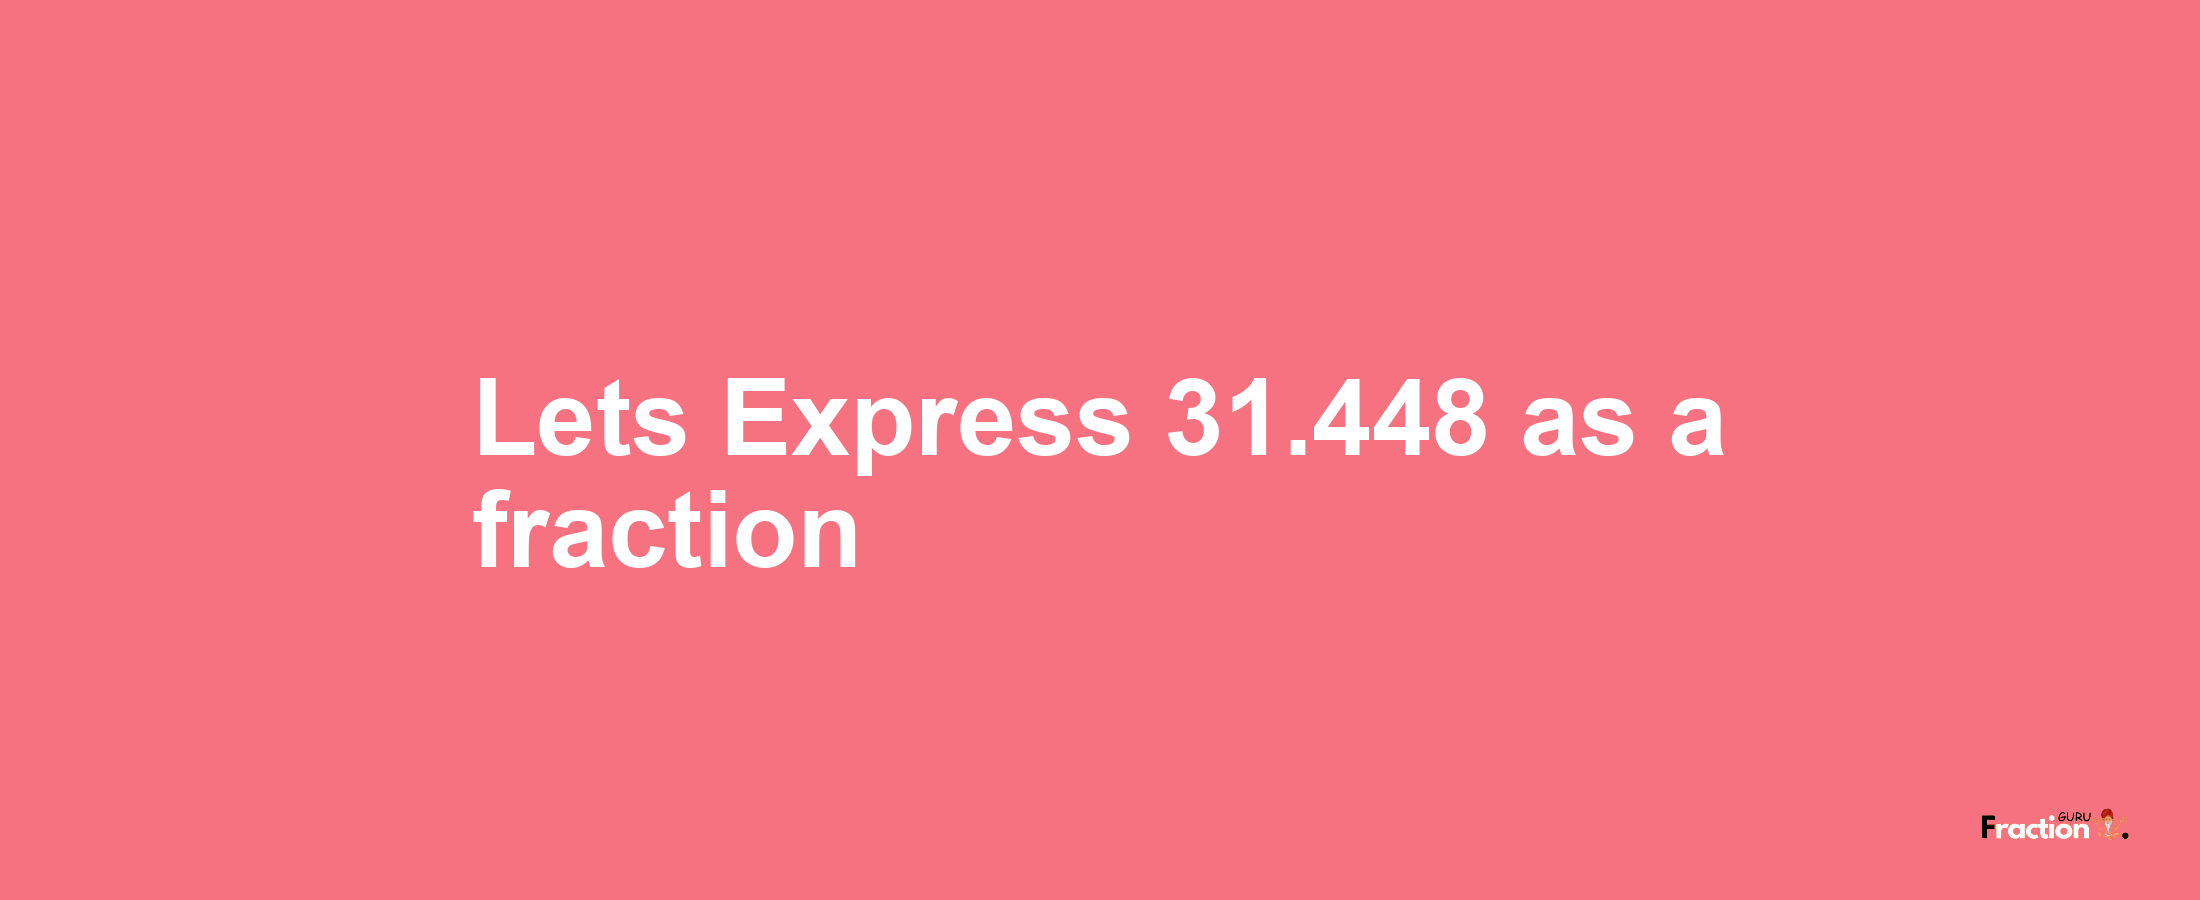 Lets Express 31.448 as afraction